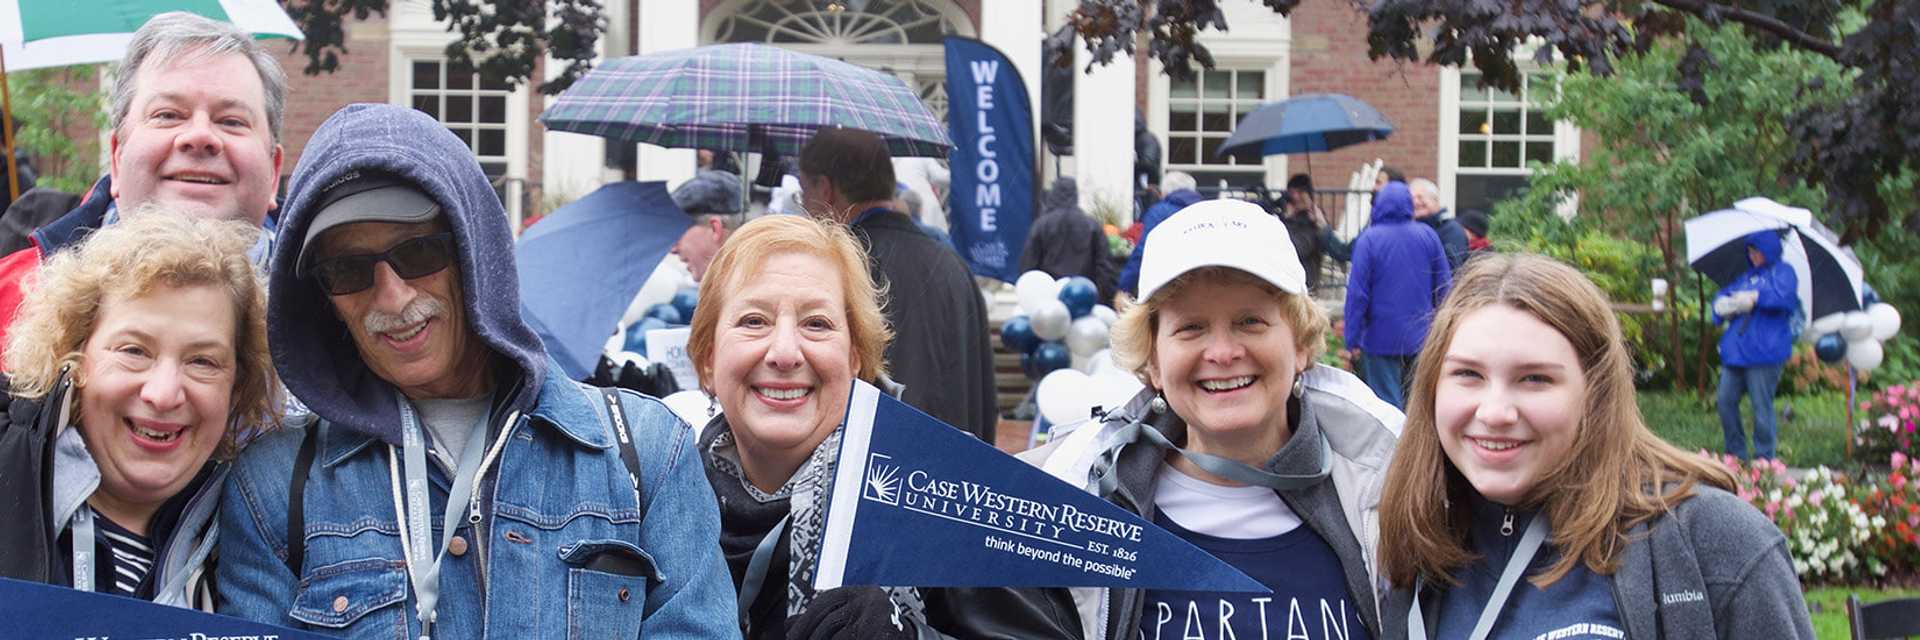 Photo of a group of Case Western Reserve University alumni wearing CWRU clothing and holding pennants 